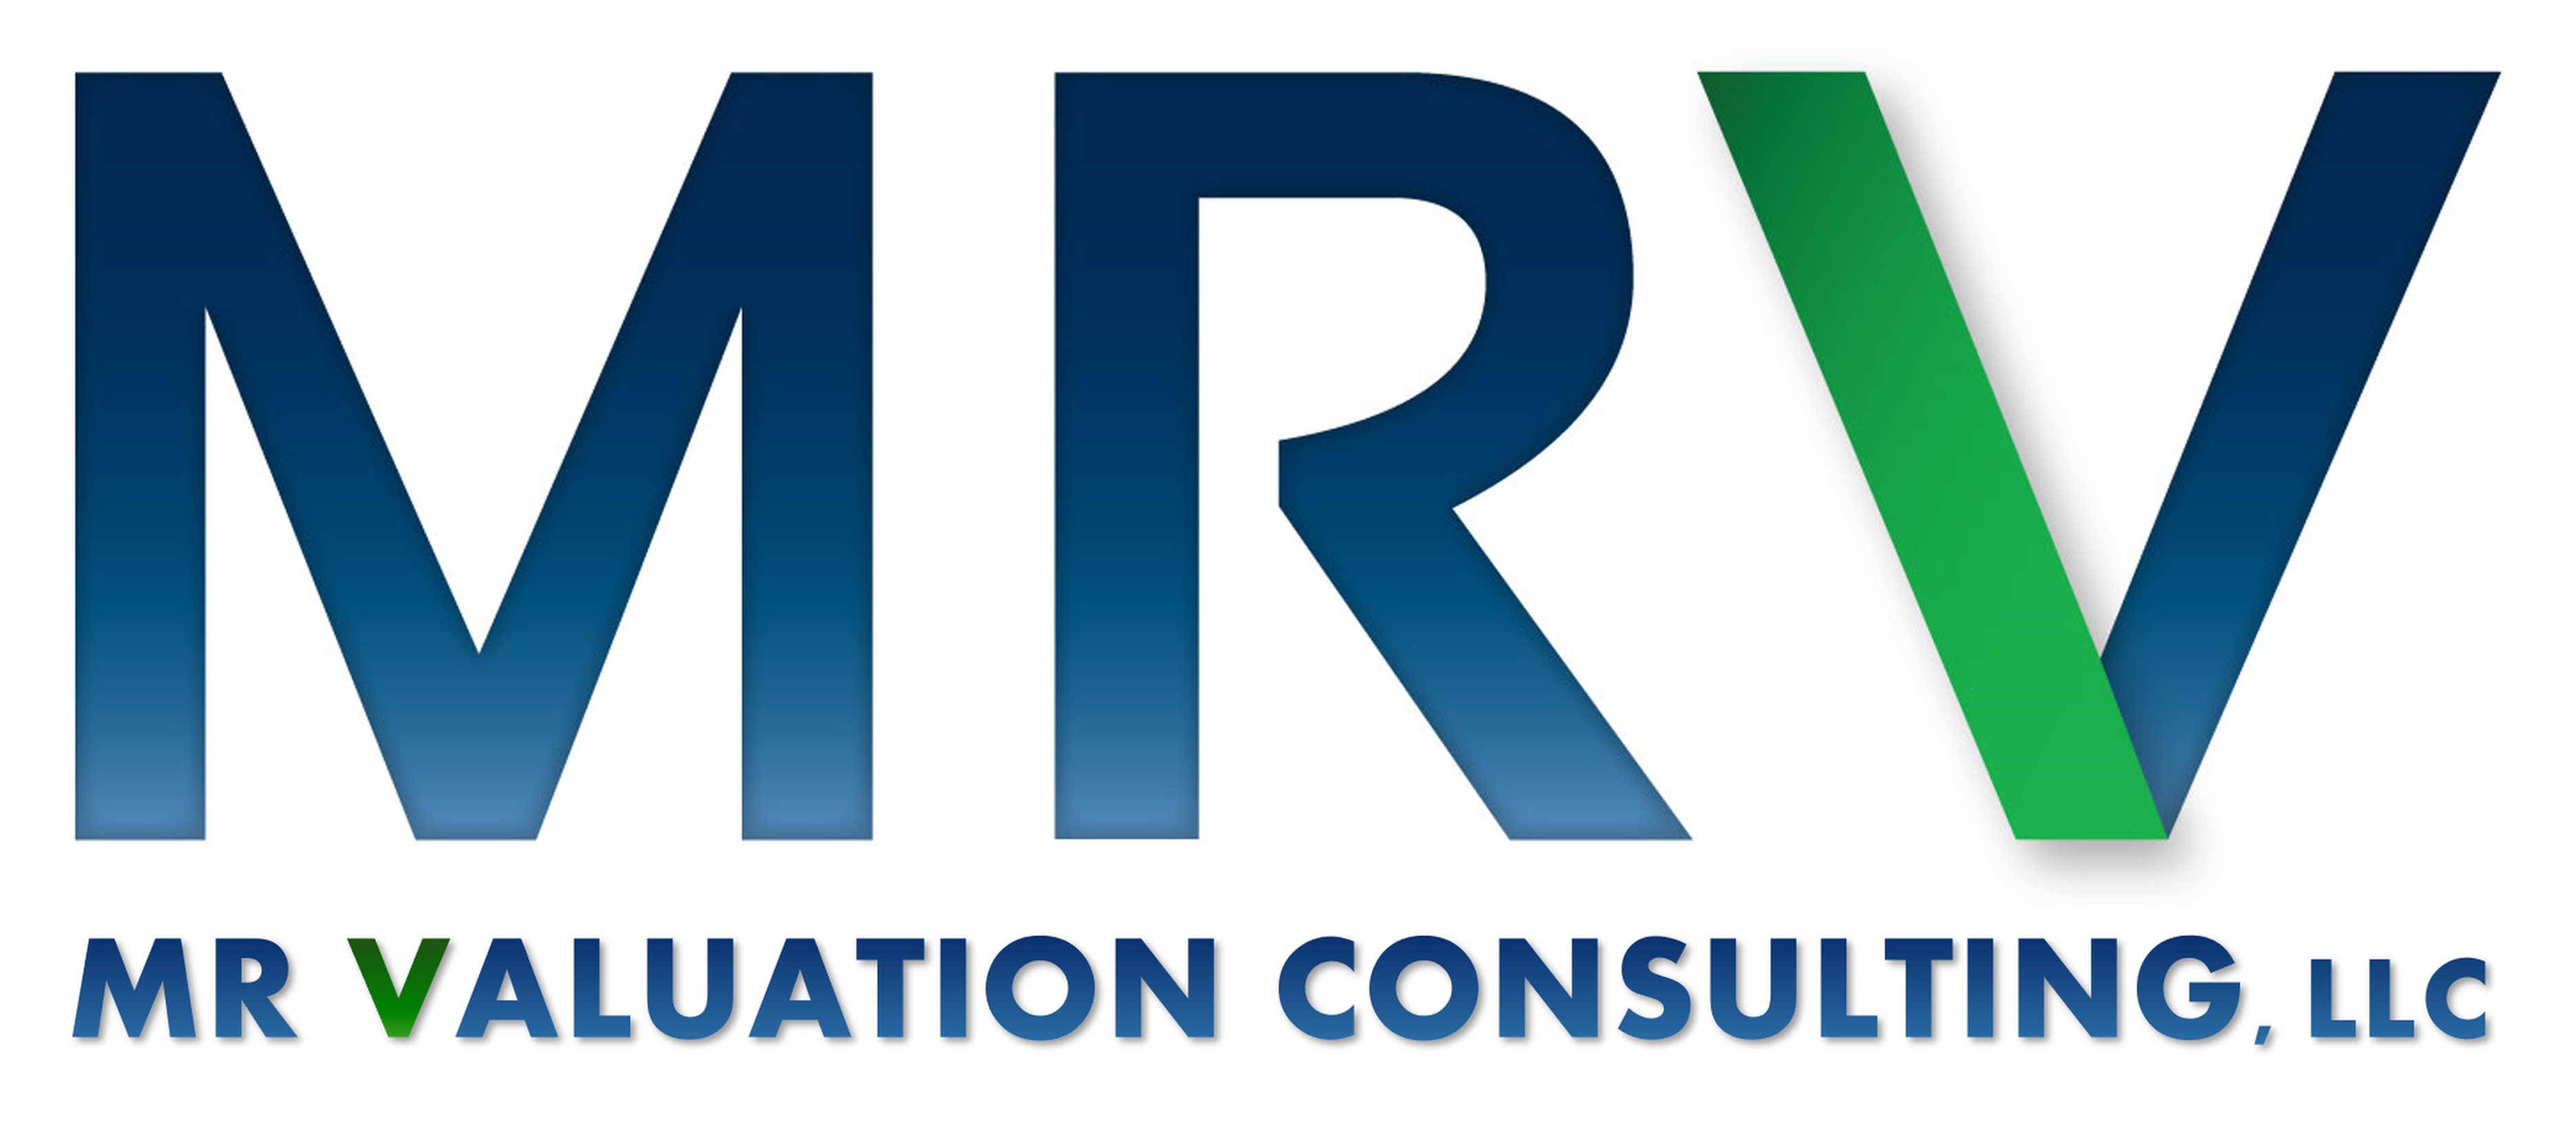 MR Valuation Consulting, LLC